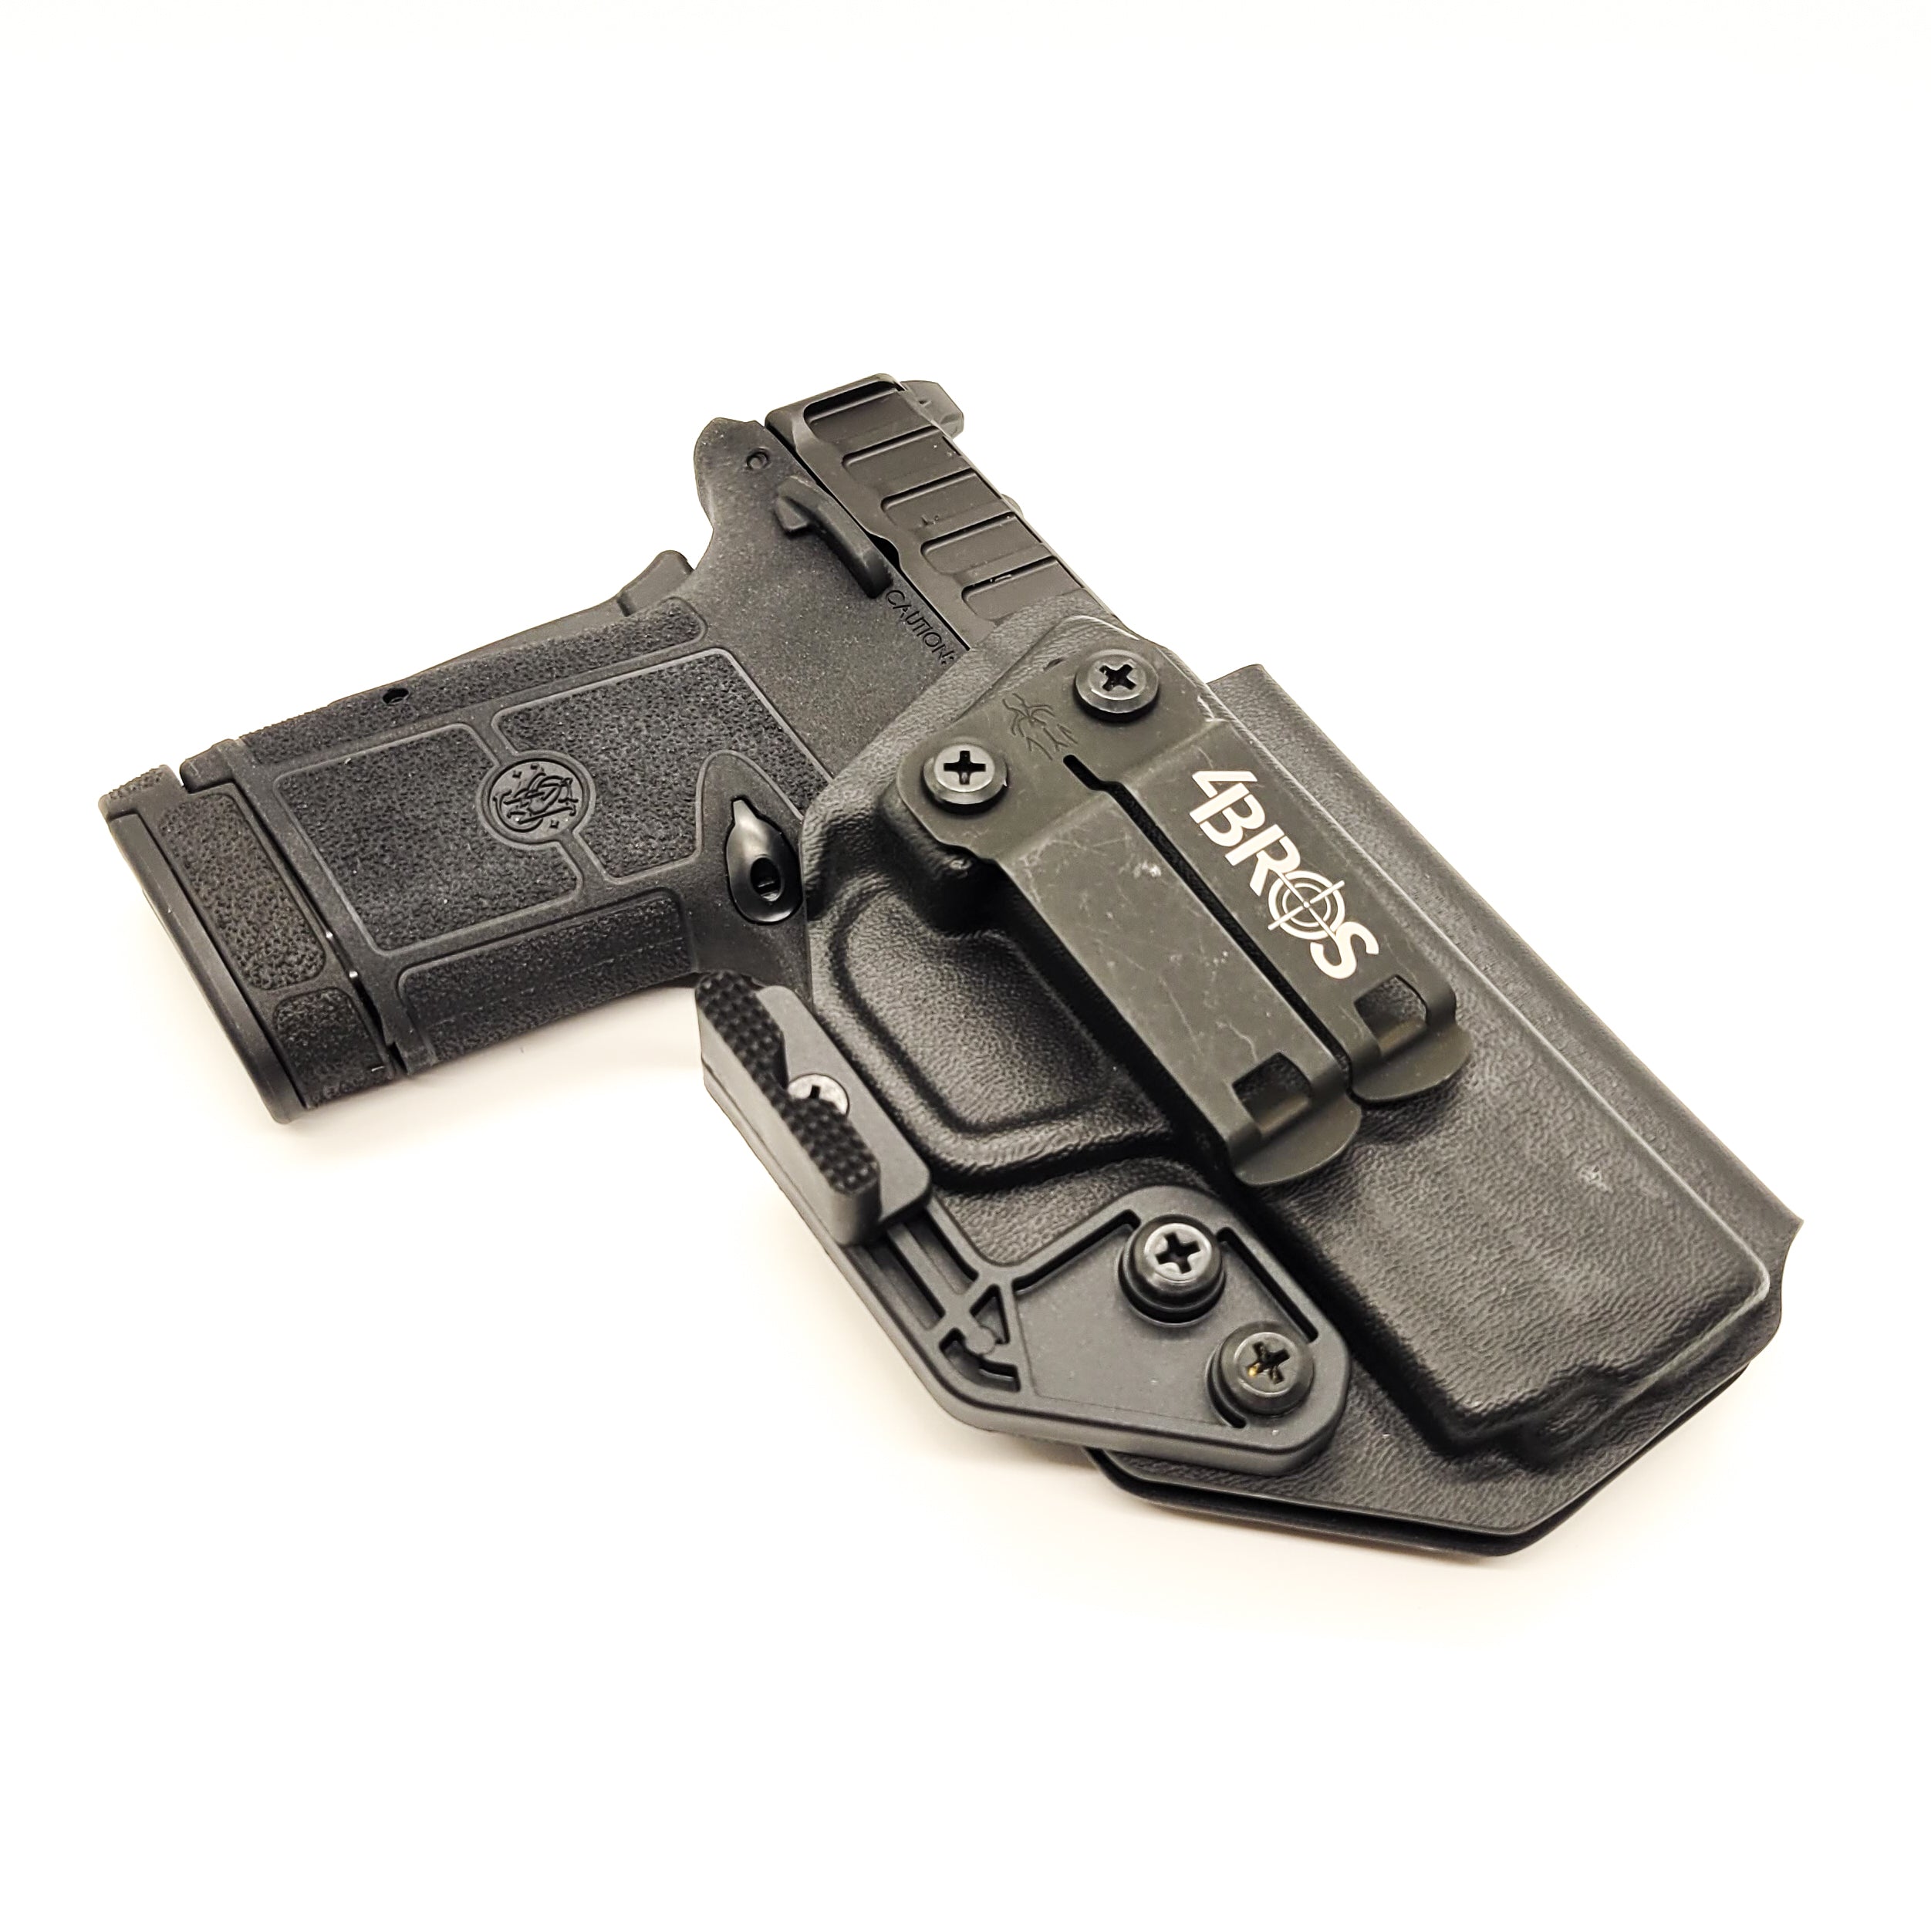 For 2022 best Inside Waistband IWB AIWB Kydex Holster designed to fit the Smith & Wesson EQUALIZER handgun, shop Four Brothers Holsters. Full sweat guard, adjustable retention, minimal material, and smooth edges to reduce printing. Profiled to clear red dot sights and optics. Proudly made in the USA.